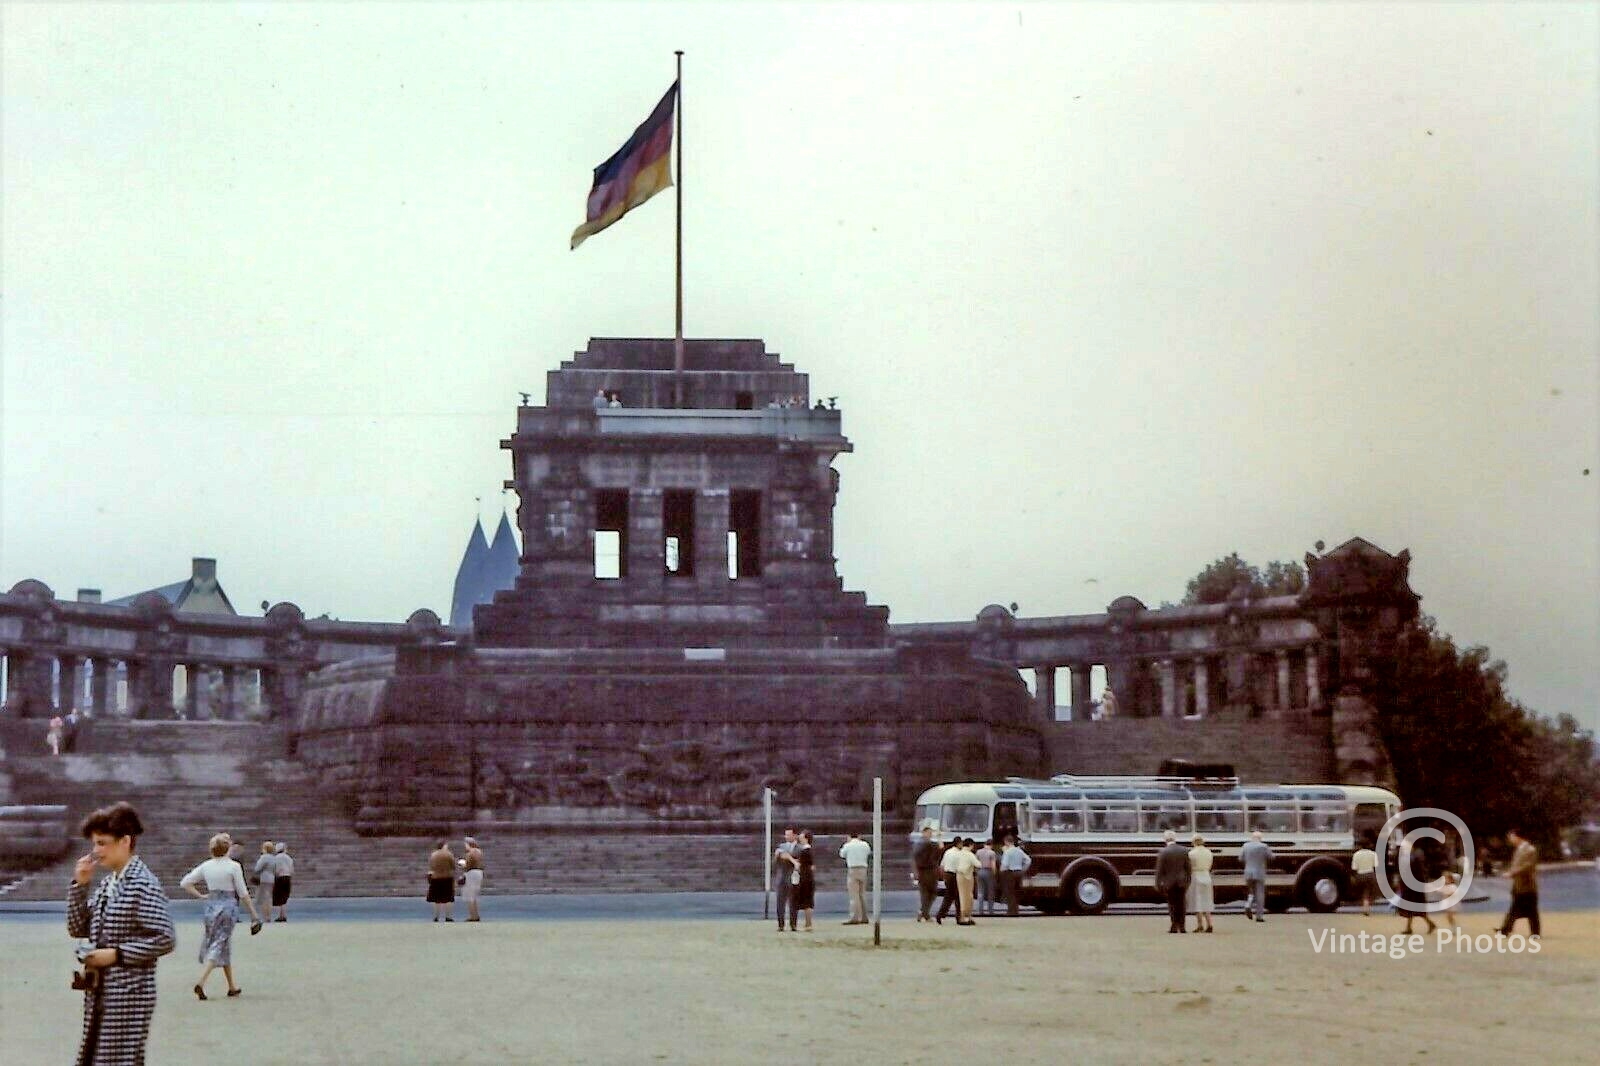 1950s Bombing Ruins of Monument in Koblenz